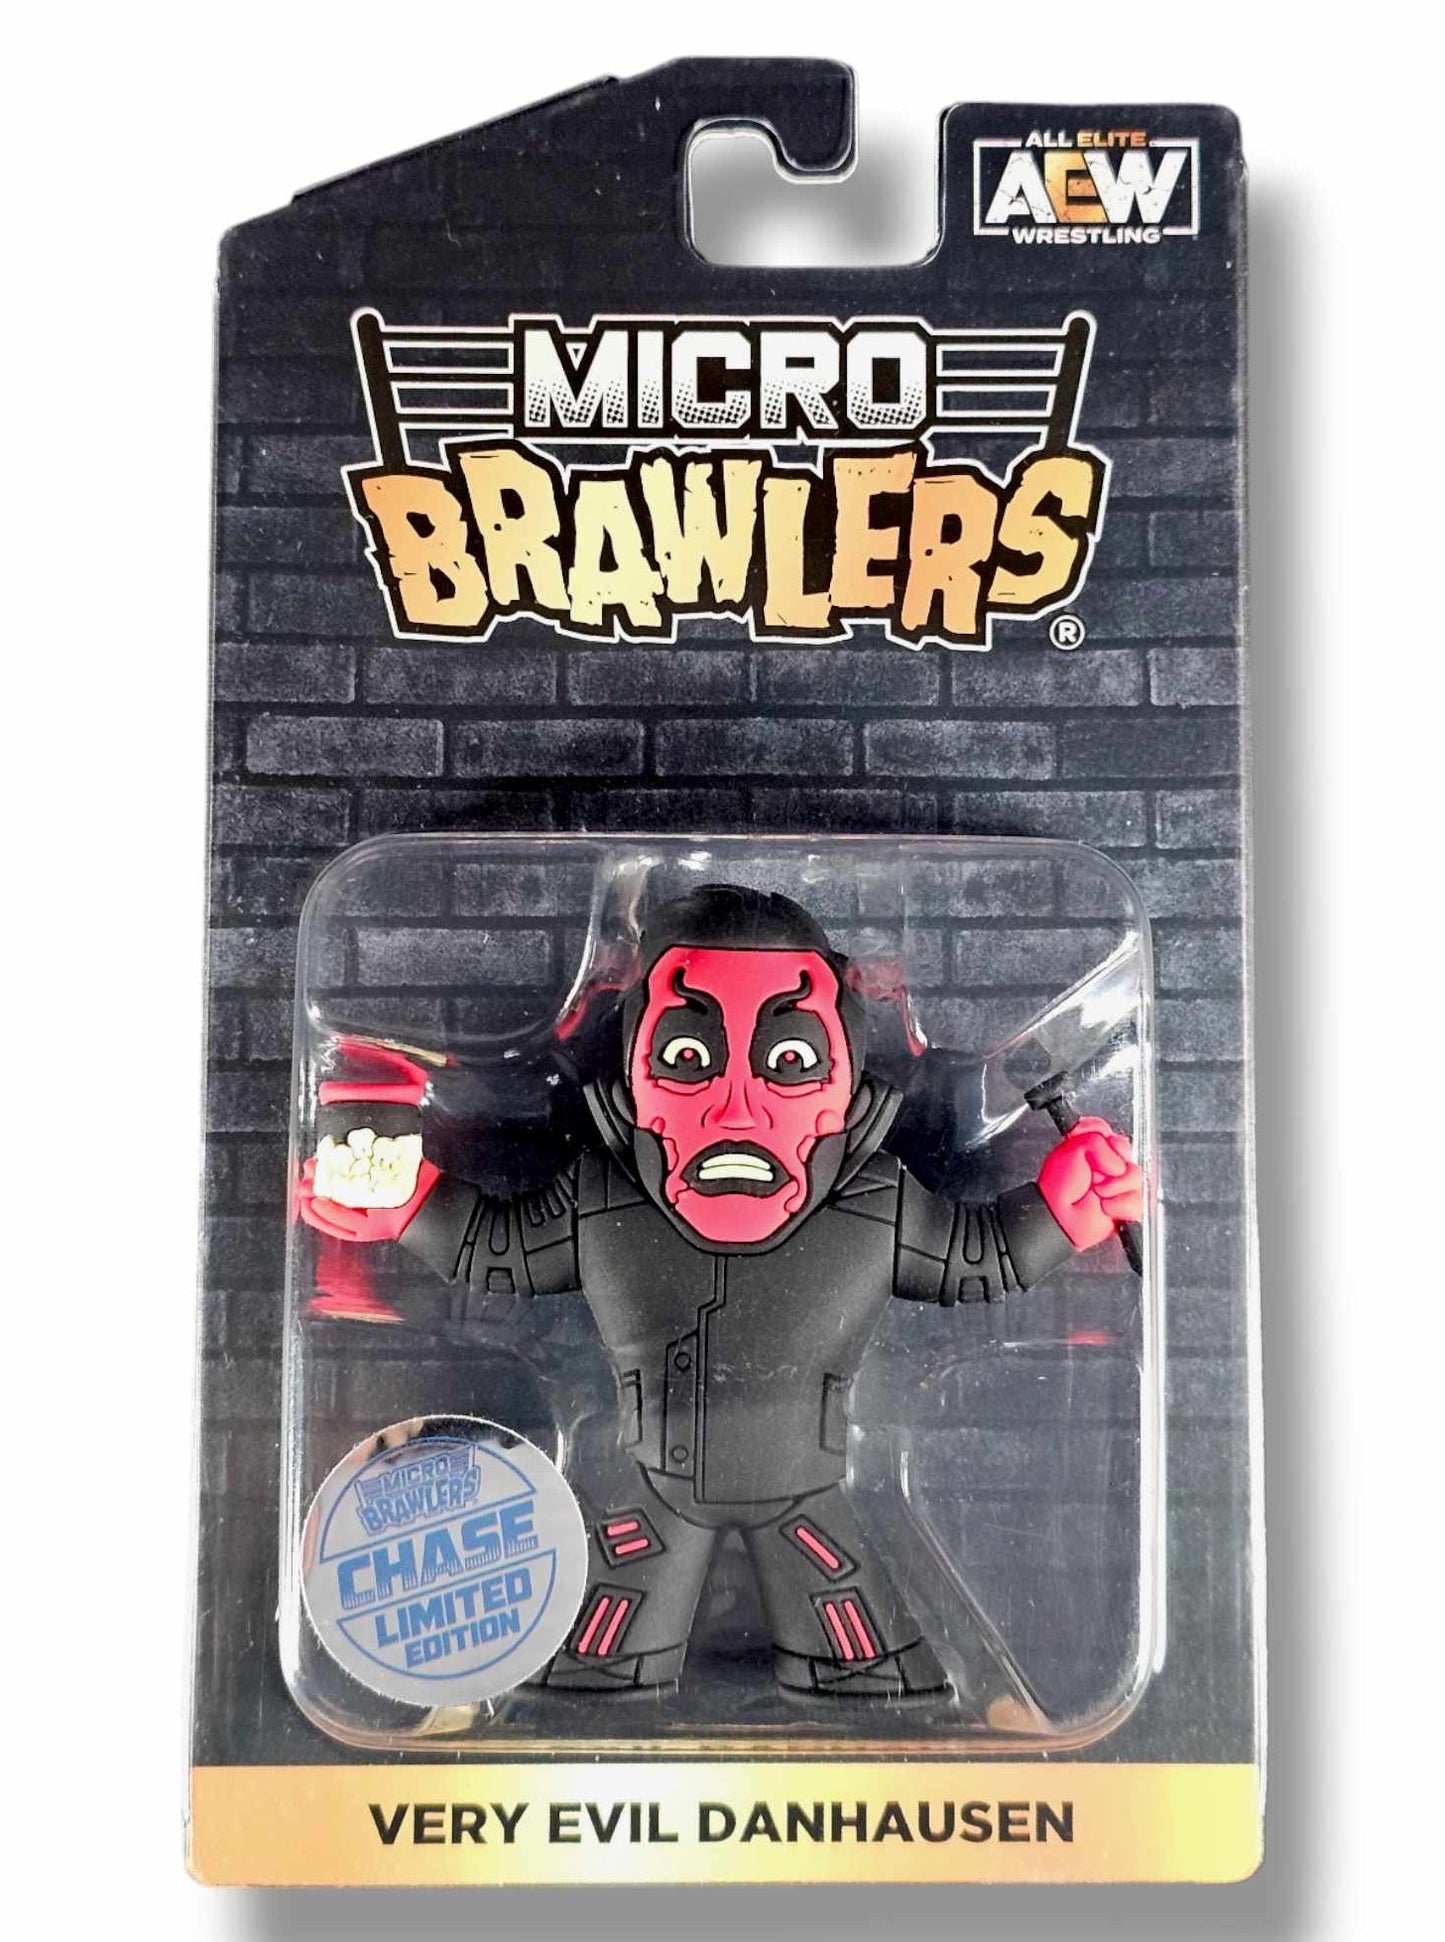 AWESOME KONG - Chase Pro Wrestling Crate Micro Brawler AEW, WWF